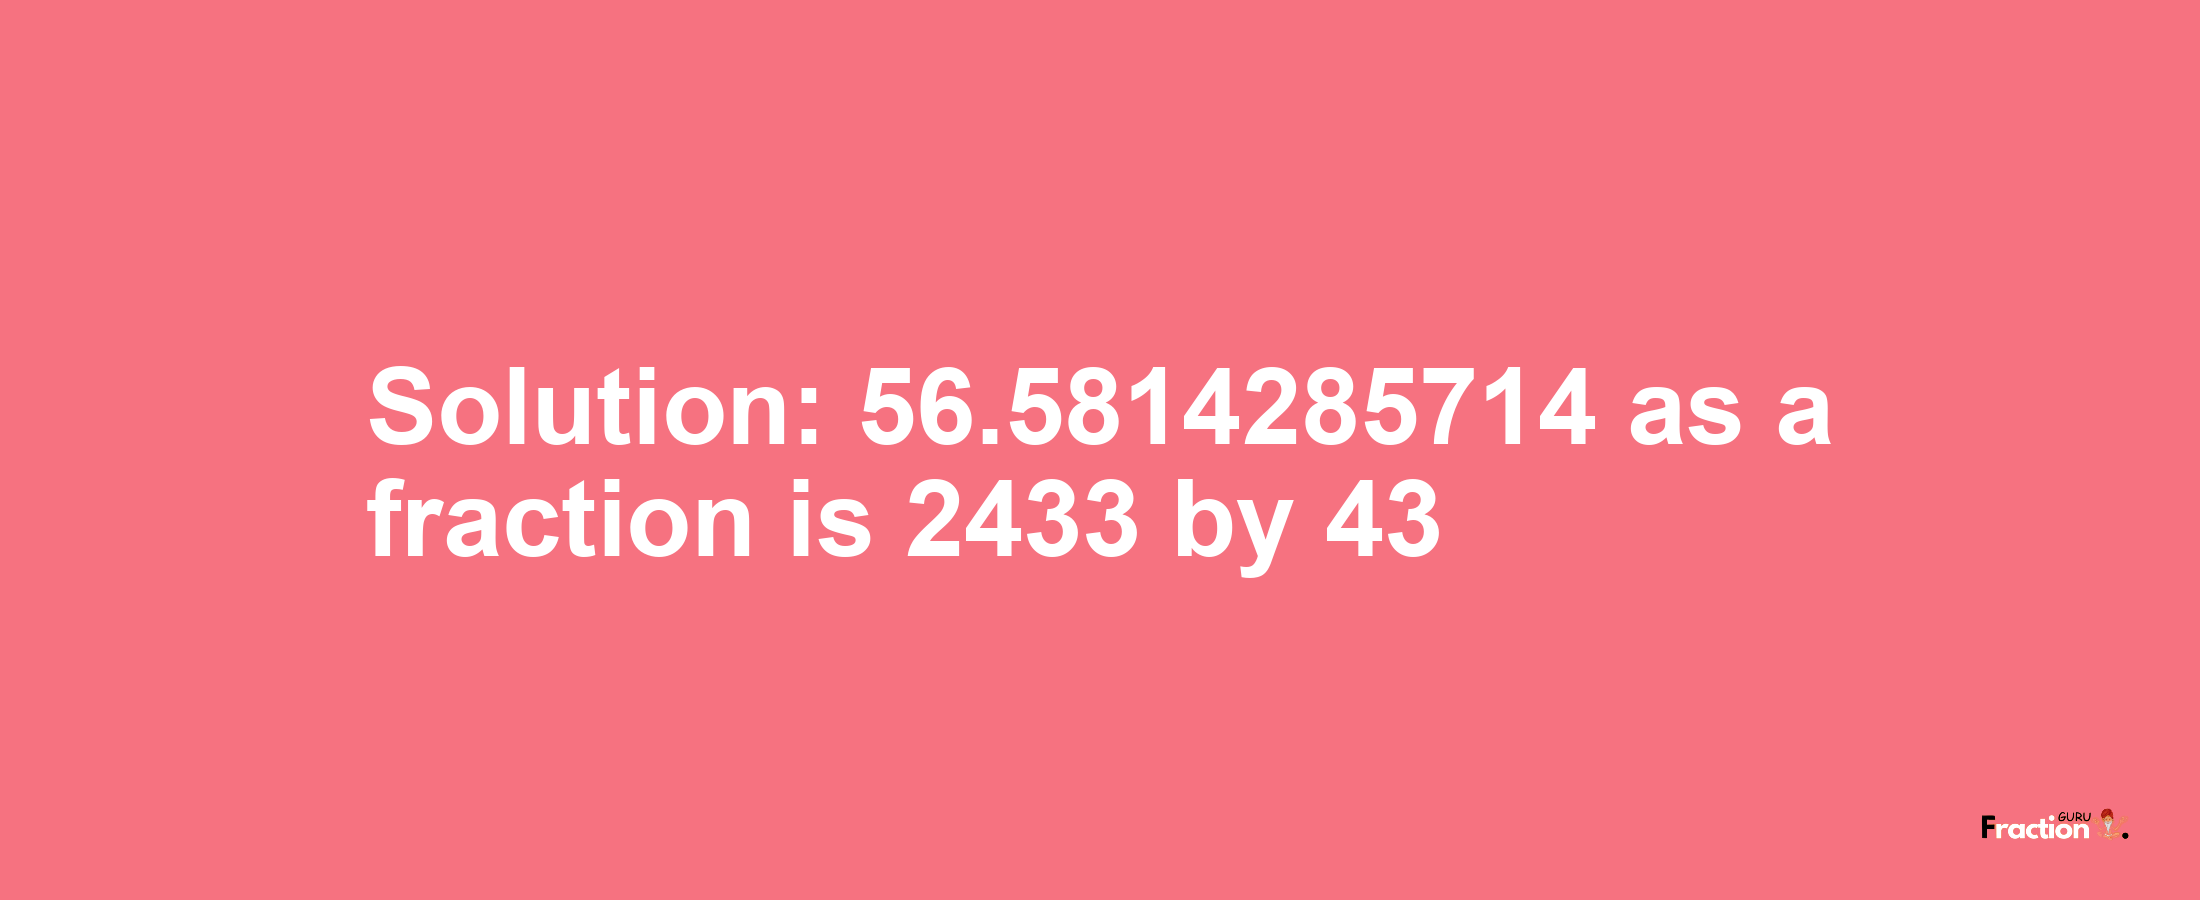 Solution:56.5814285714 as a fraction is 2433/43